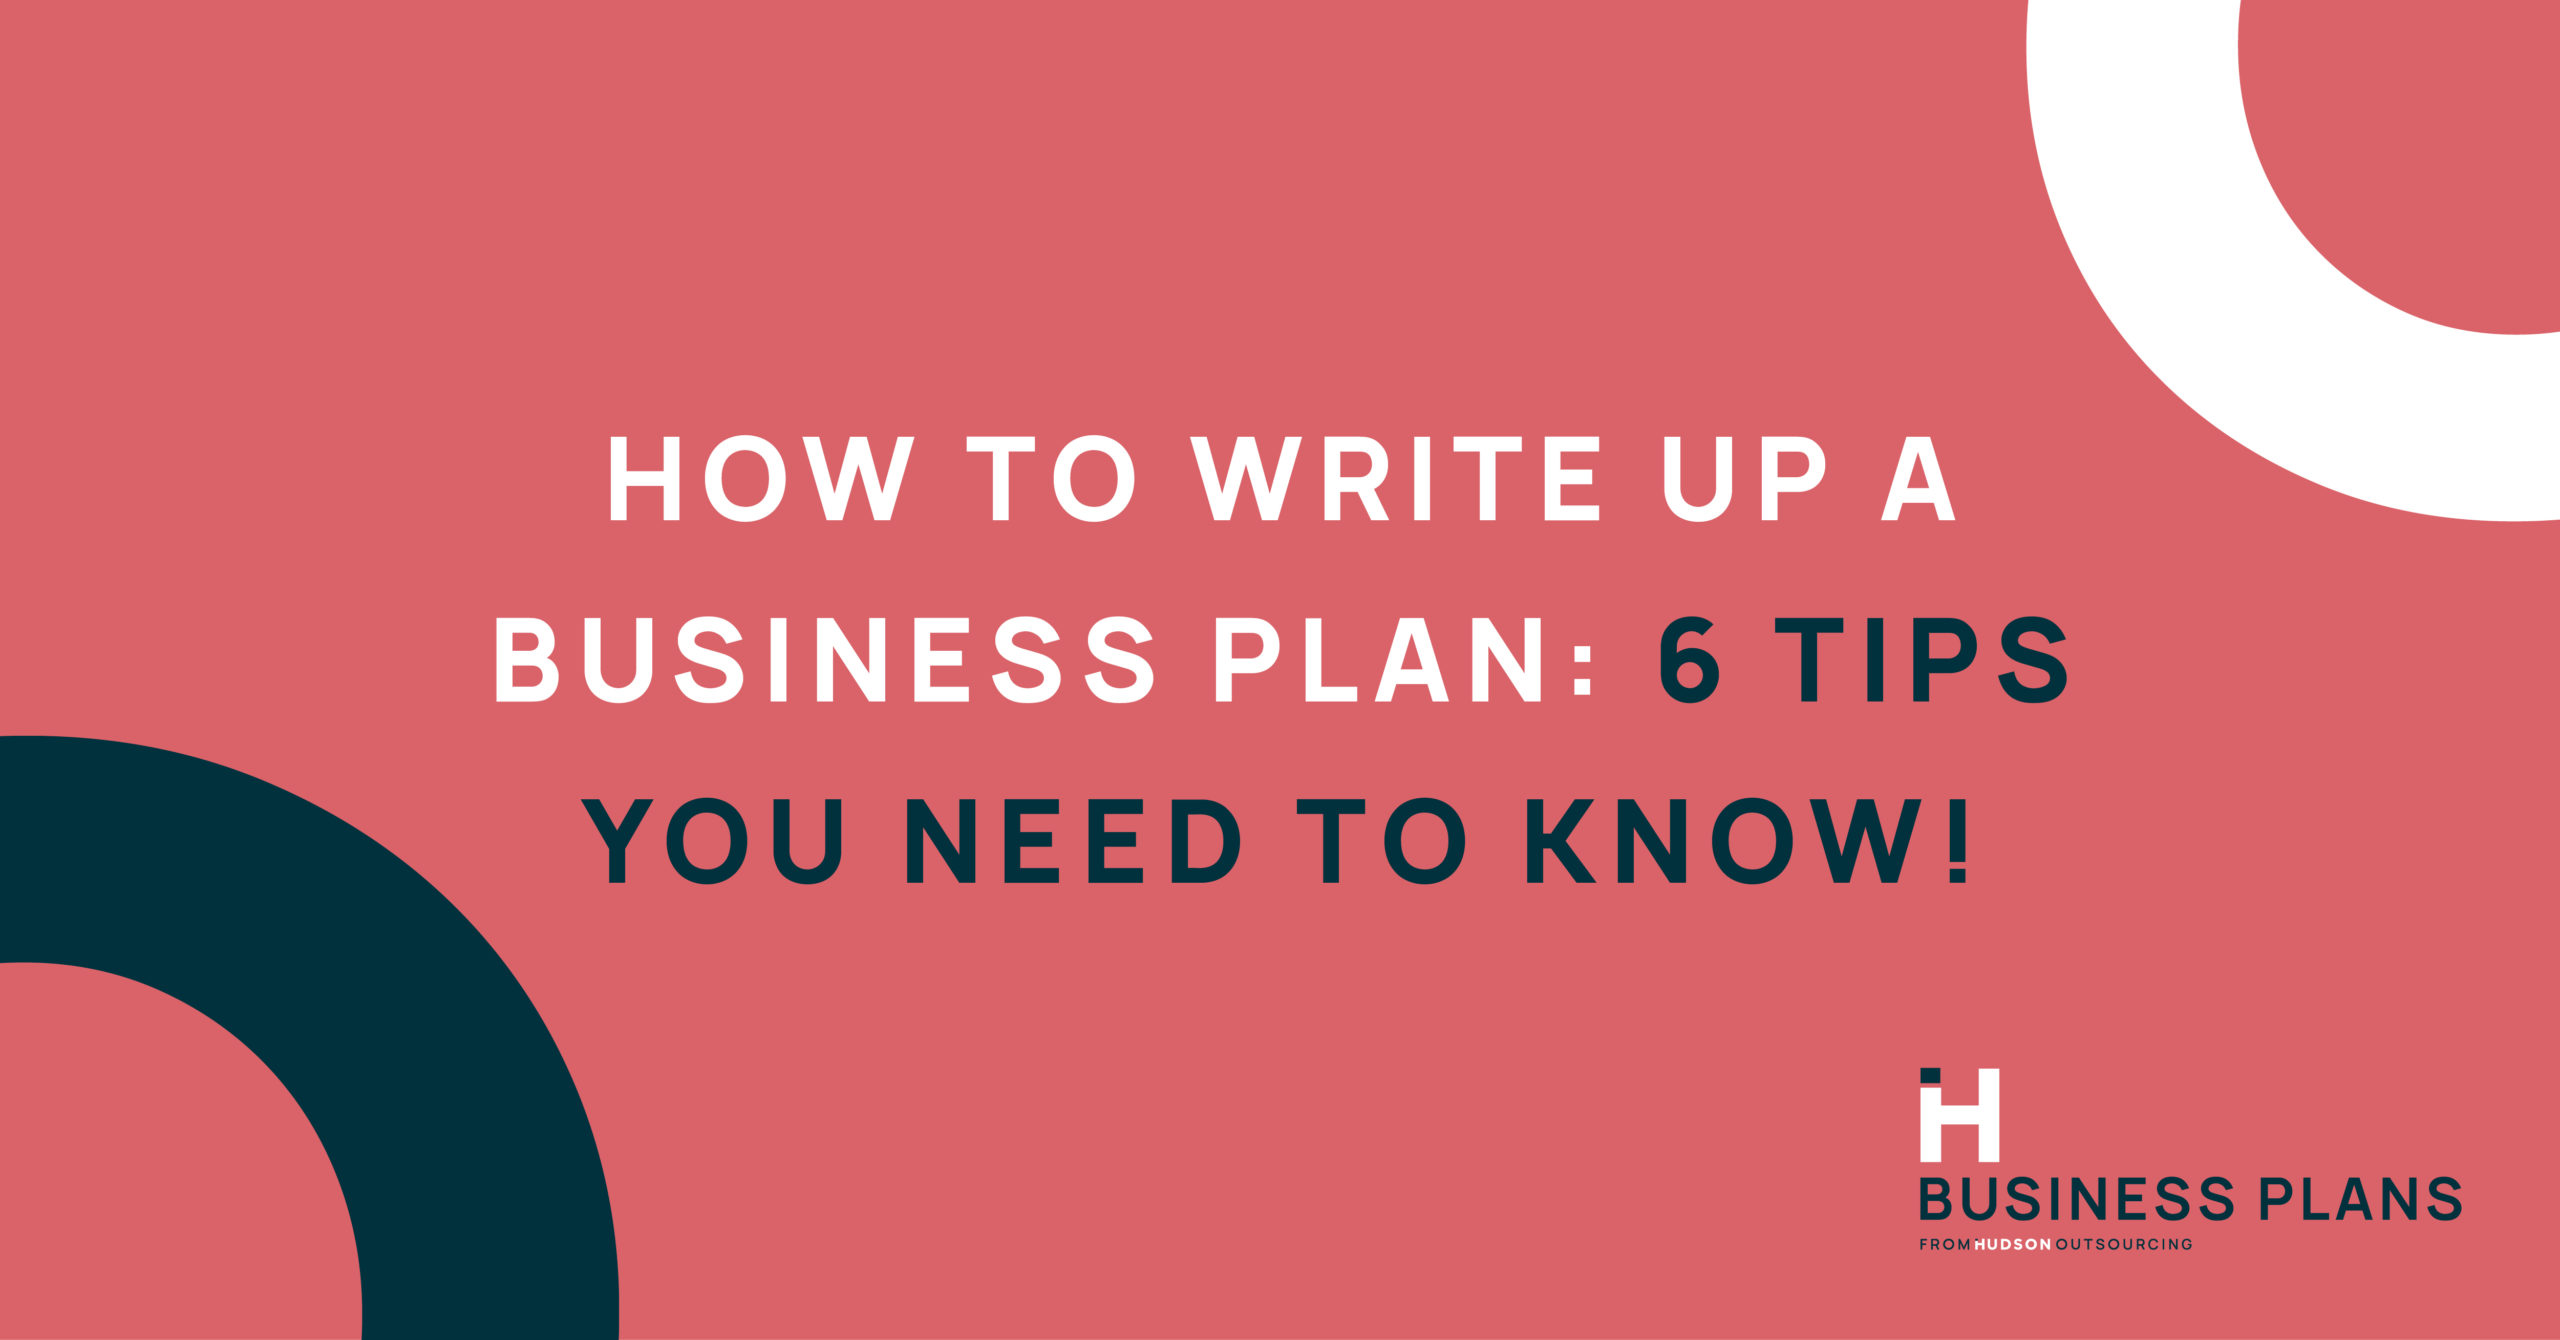 How to Write Up a Business Plan: 6 Tips You Need to Know!